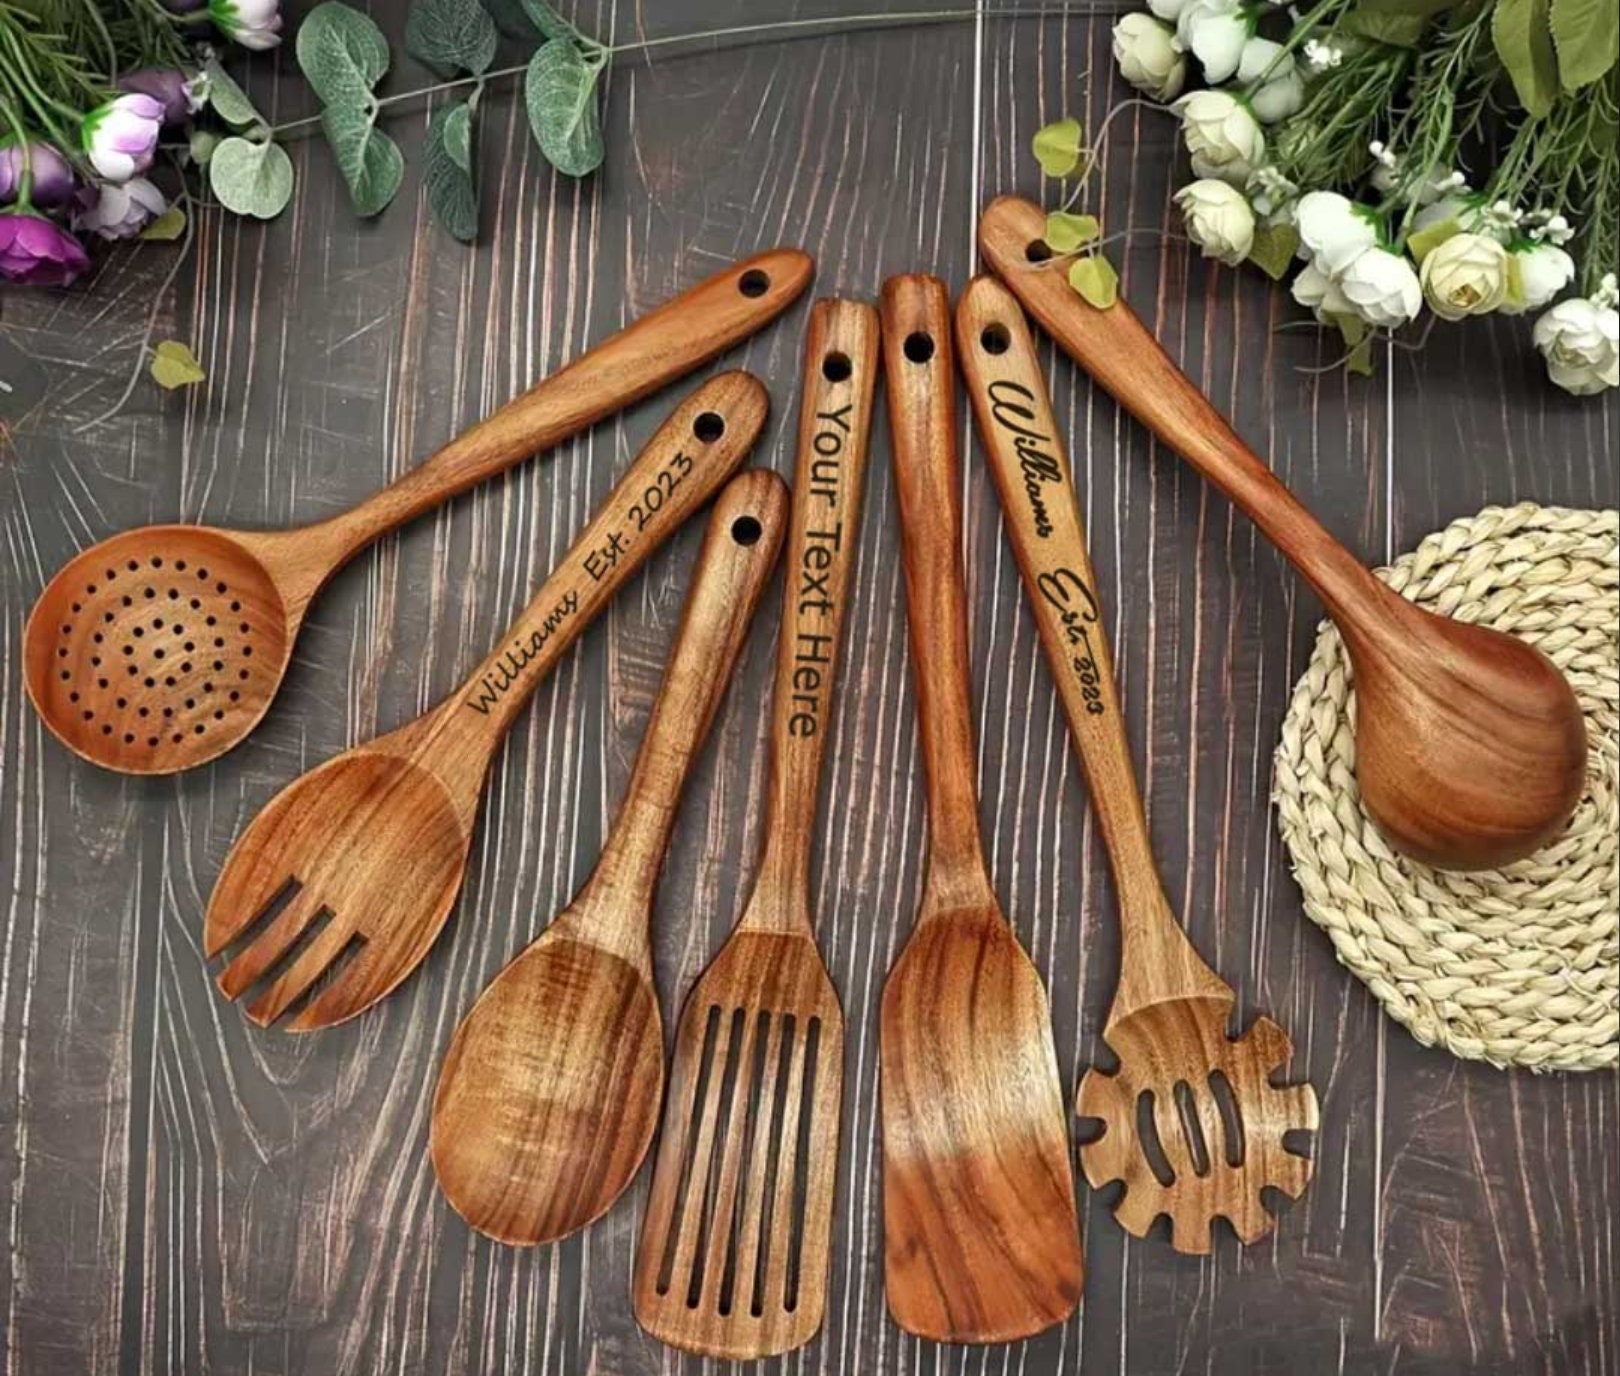 Friends TV Show Merchandise,Wooden Spoons for Cooking Utensils Set,Funny  Wooden Spatula Set for Kitchen Decor,Friends TV Show Decor,Friends TV Show  Gifts for women,Housewarming Present (5PCS) Friends spoons 